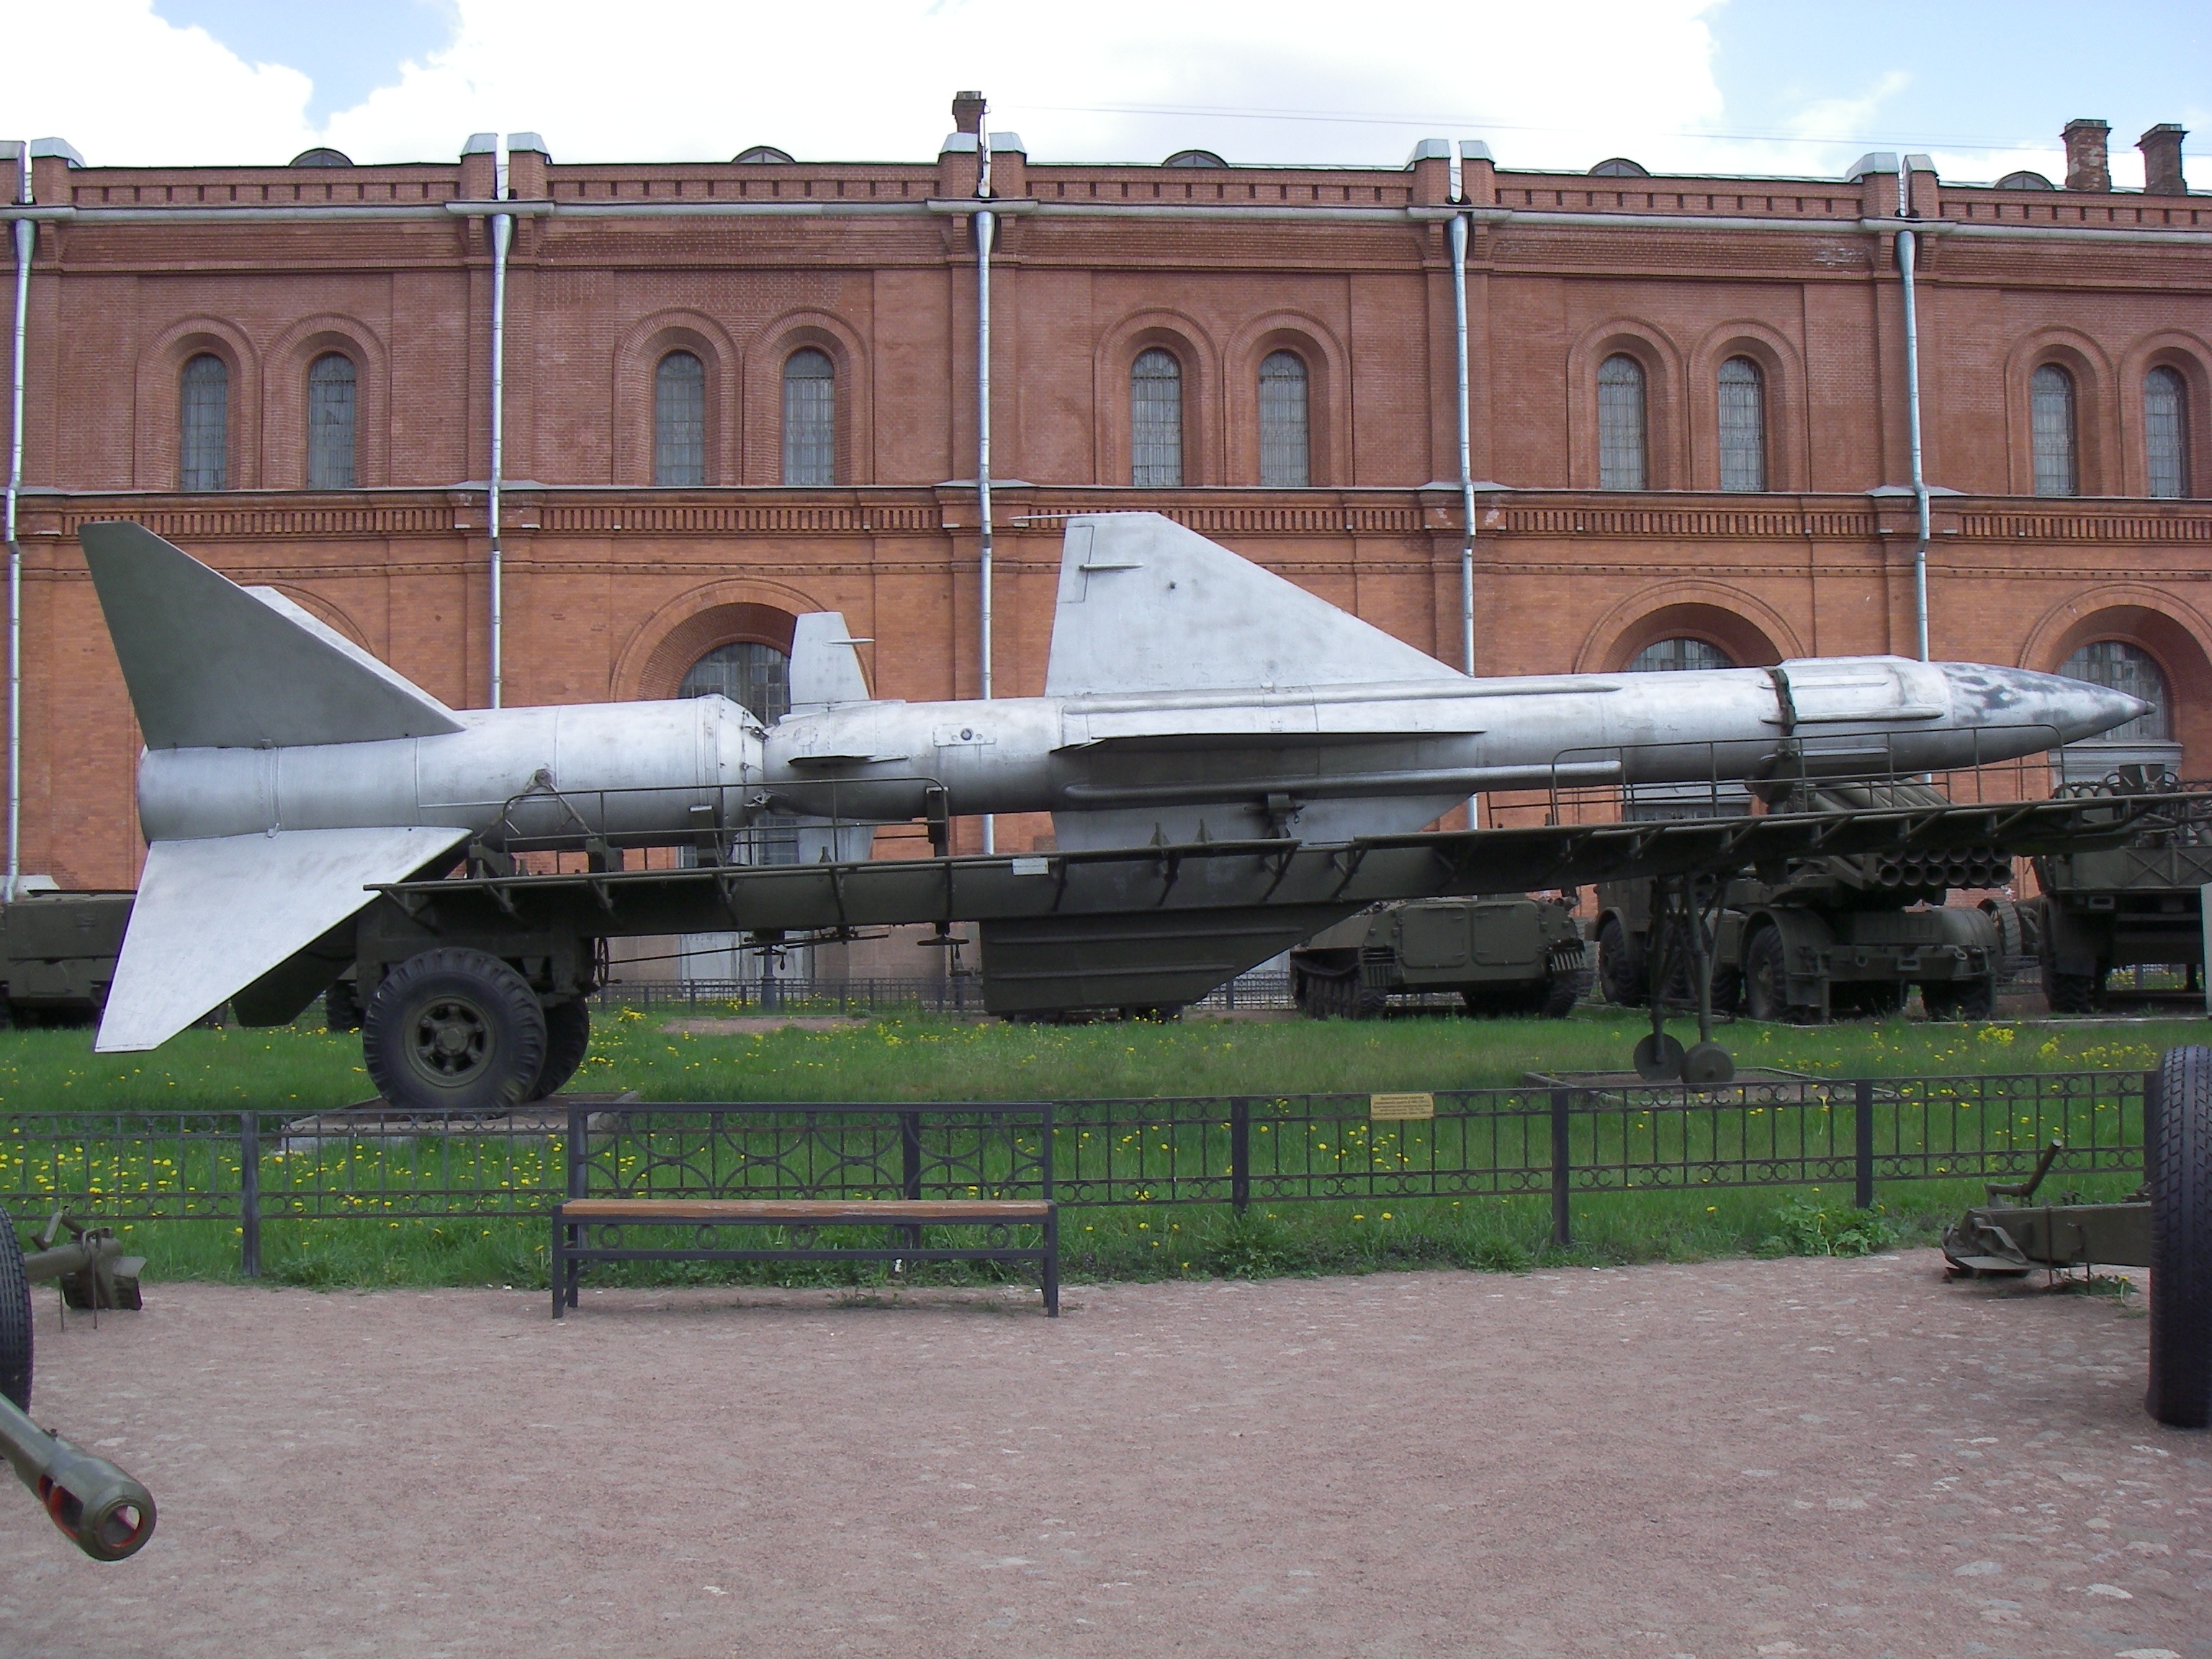 Two-stage_V-400_(5V11)_missile_of_surface-to-air_missile_system_%C2%ABDal%C2%BB_in_Military-historical_Museum_of_Artillery%2C_Engineer_and_Signal_Corps_in_Saint-Petersburg%2C_Russia.jpg